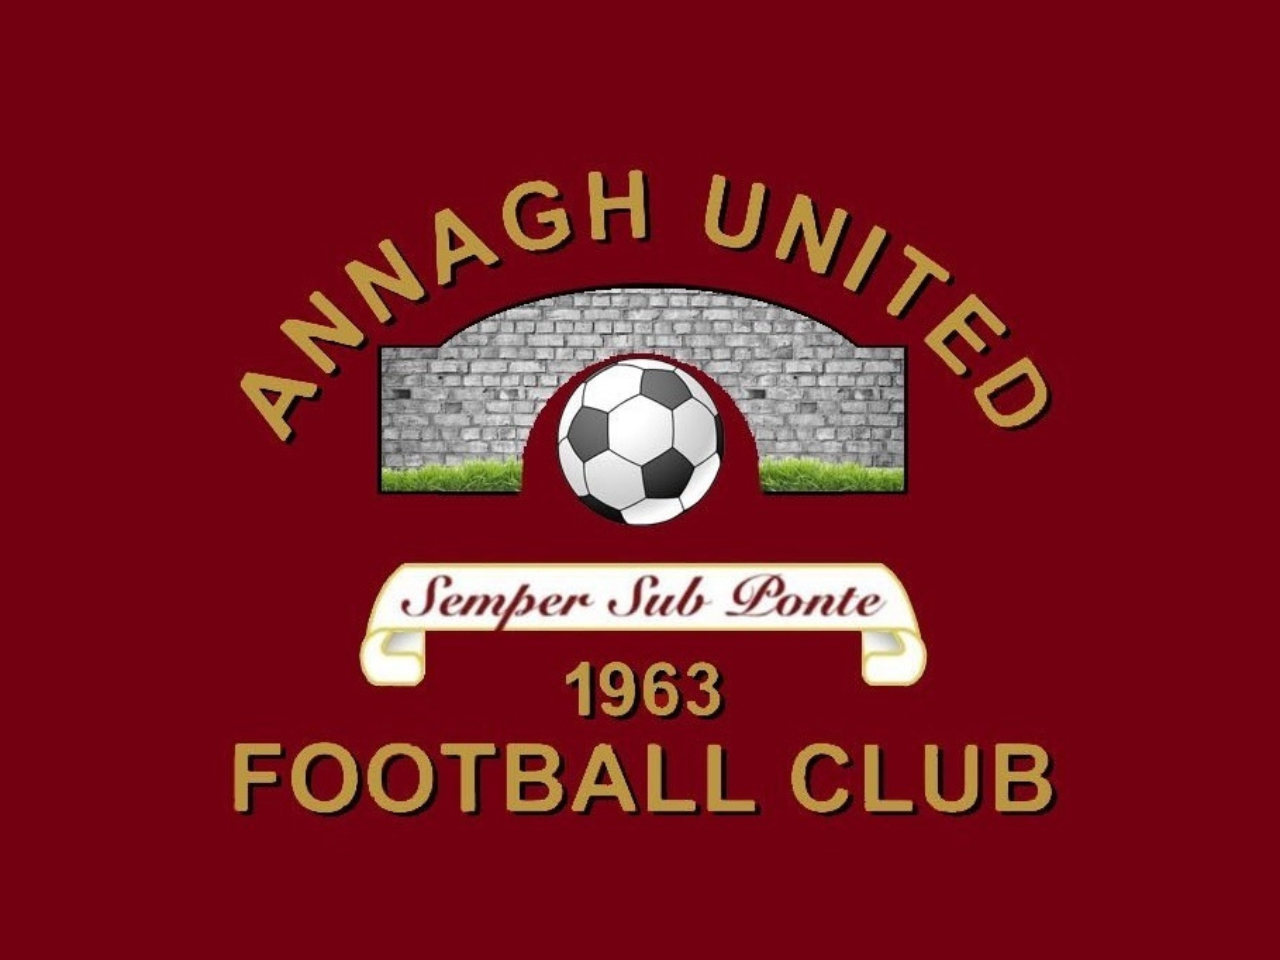 New PCU sign at Annagh United F.C